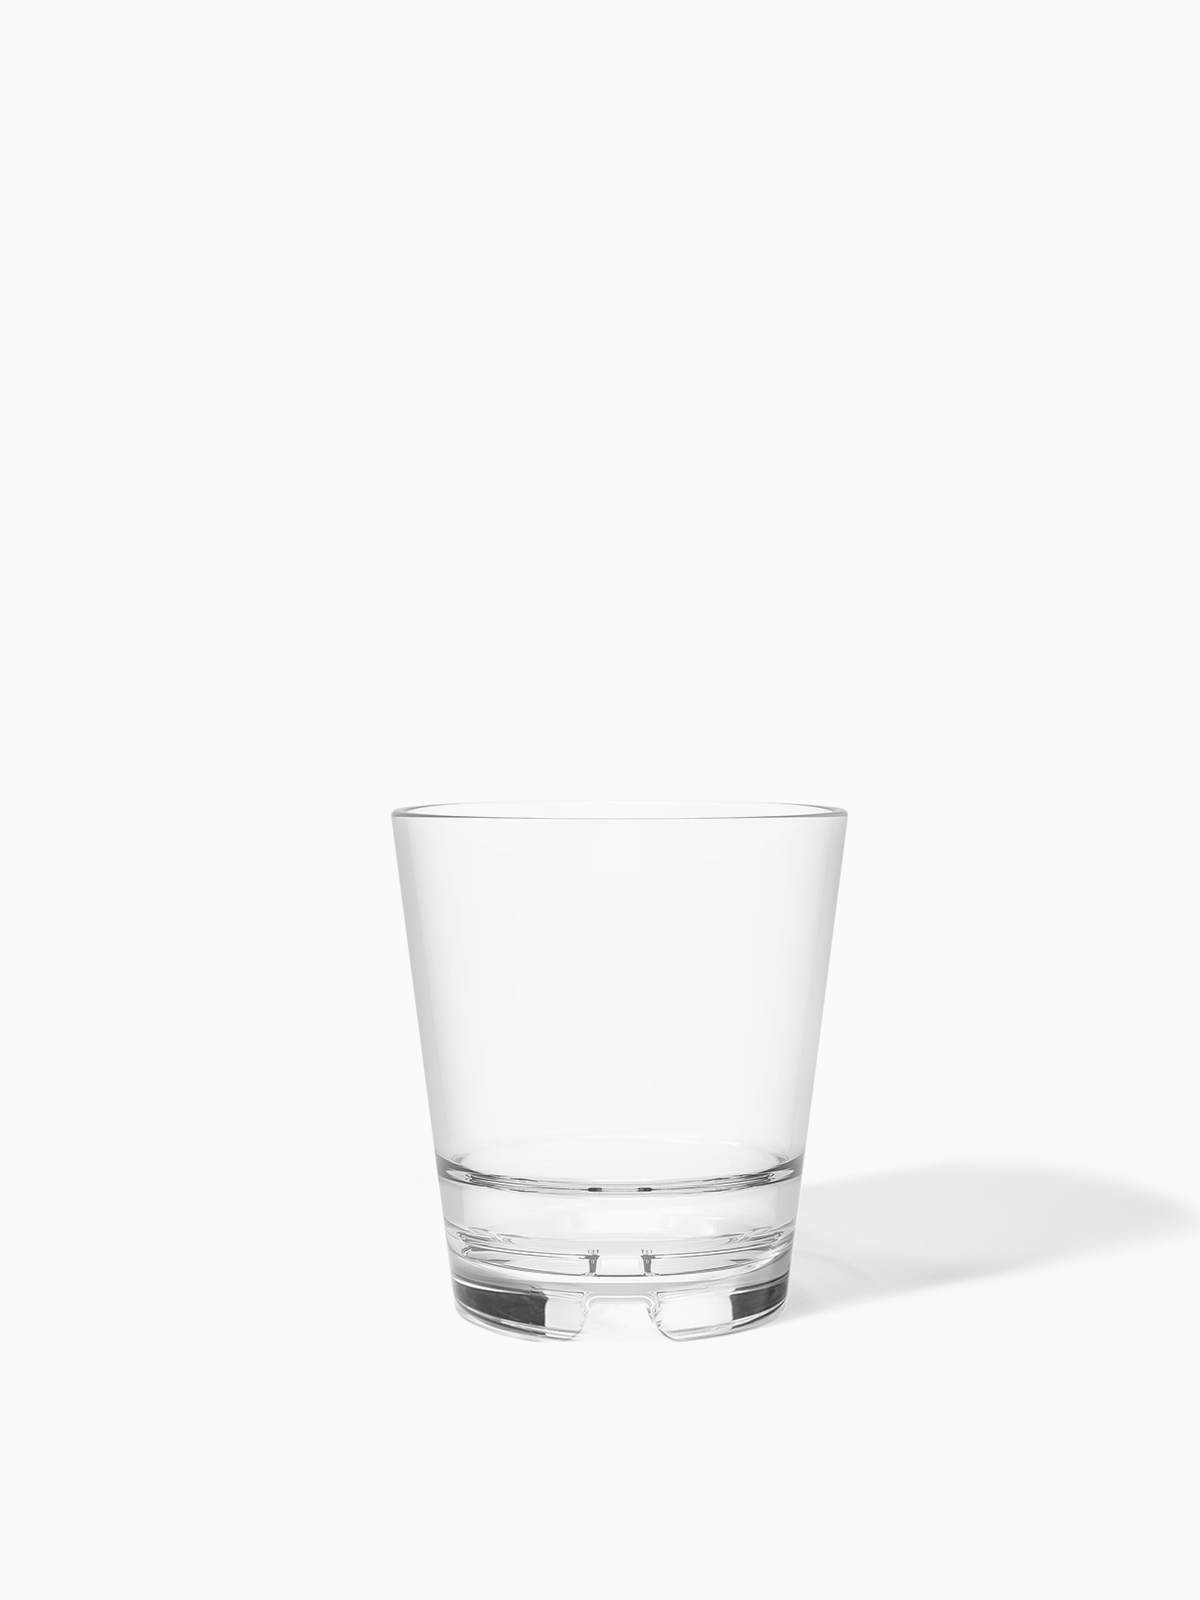 RESERVE 12oz Stackable Double Old Fashioned MS Copolyester Glass - Bulk-0